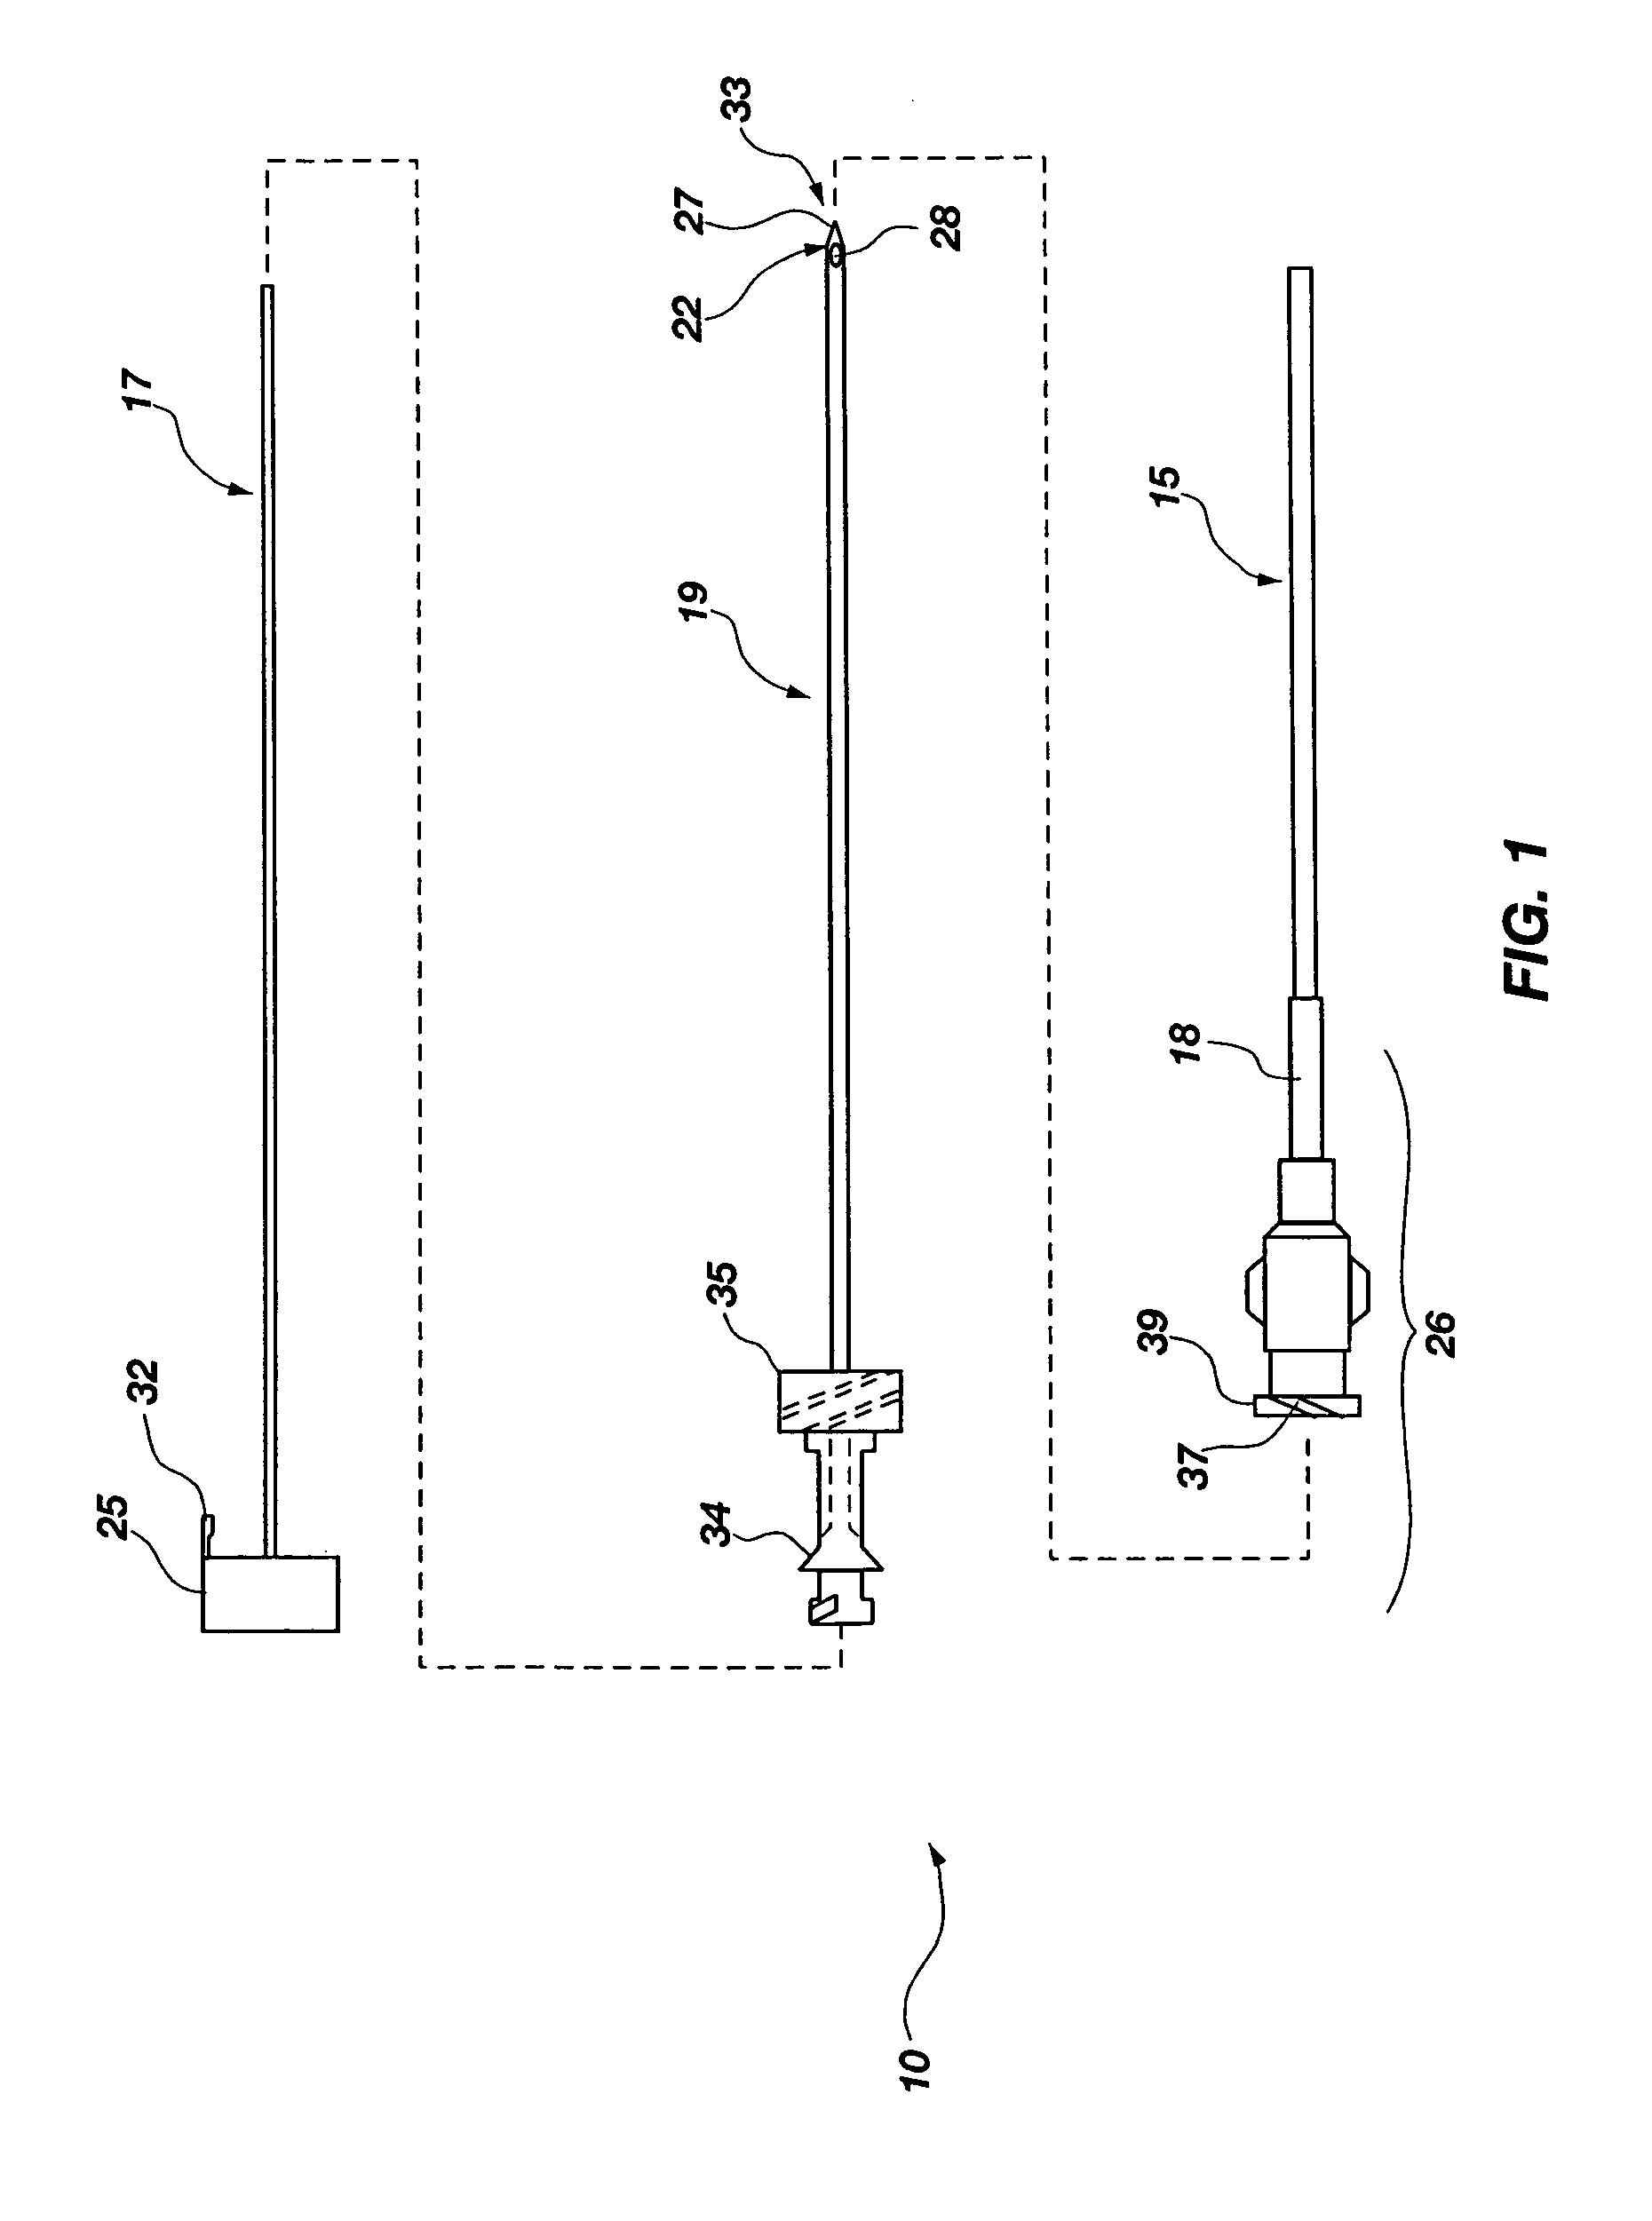 Flow elements for use with flexible spinal needles, needle assemblies for manufacture and methods therefor